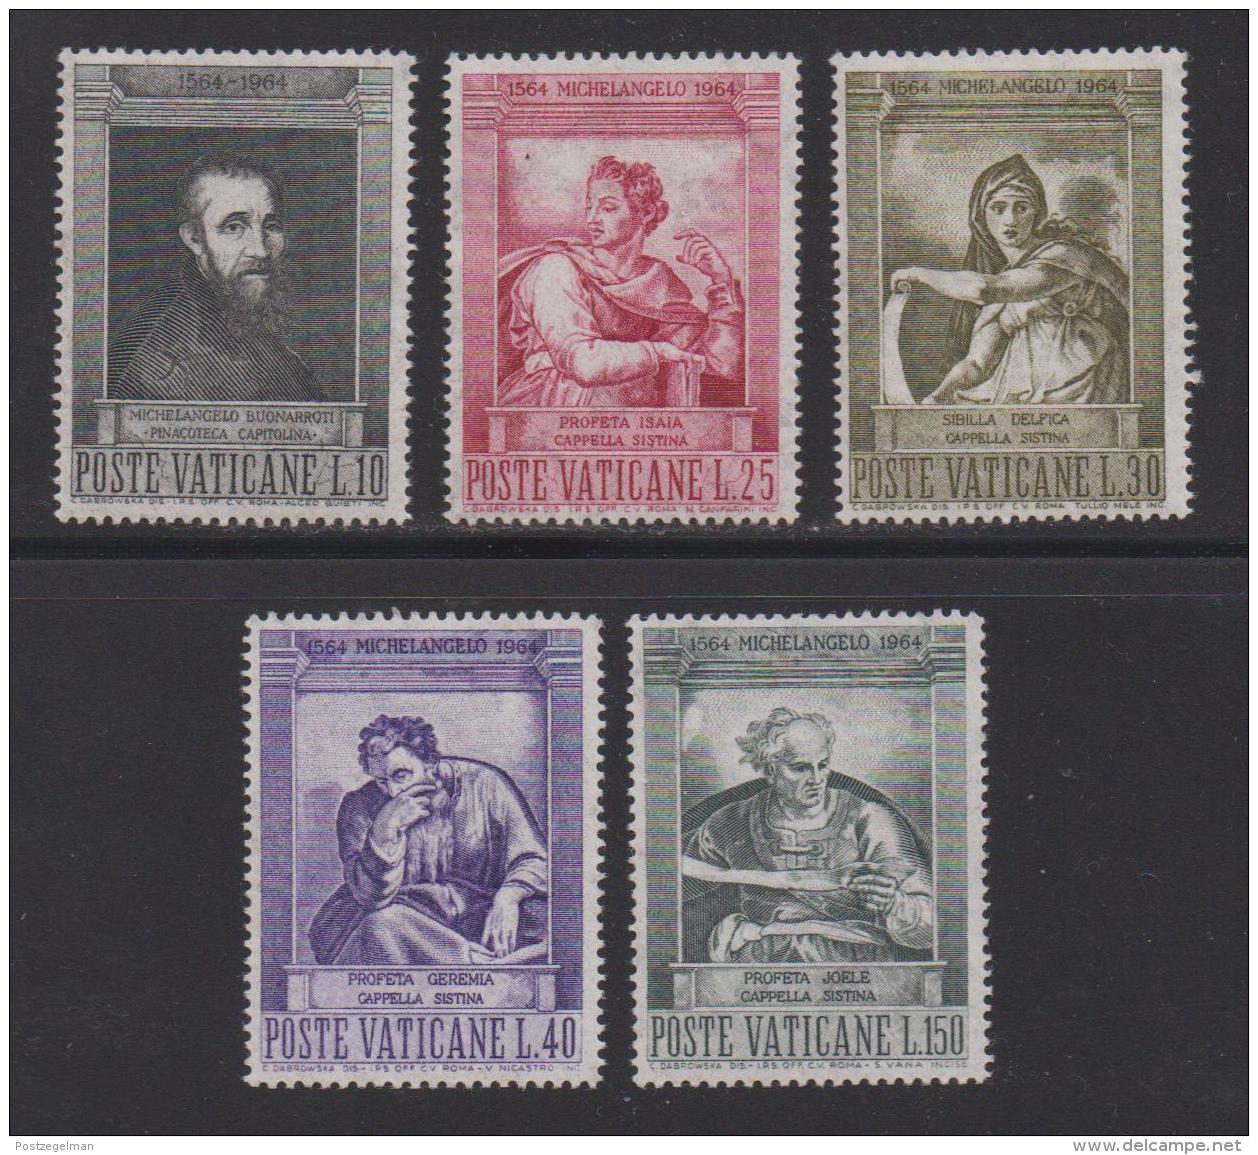 VATICAN, 1964, Mint Never Hinged Stamps , Michel Angelo , 454-458, #3876, - Unused Stamps